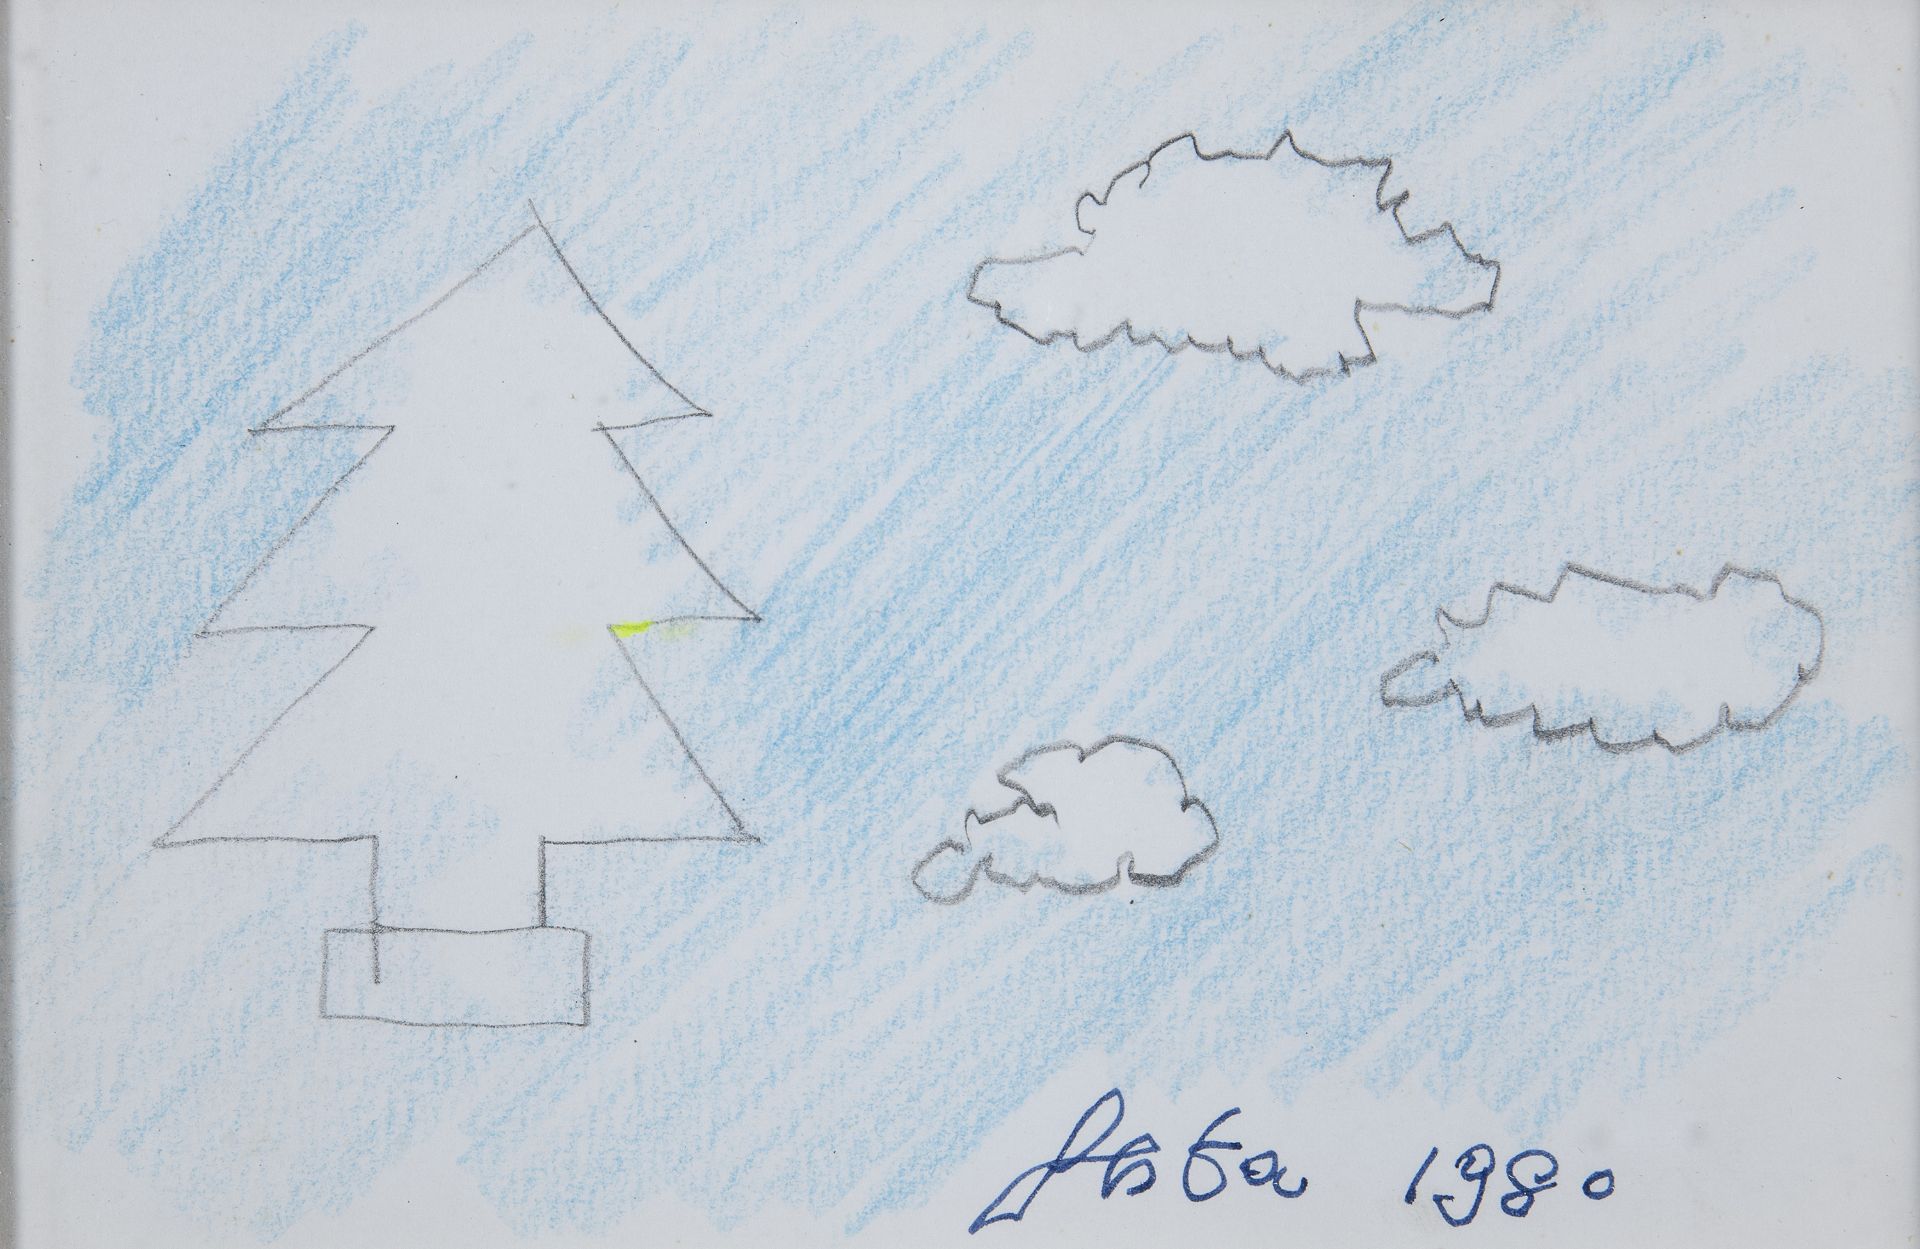 PASTEL AND PENCIL DRAWING BY TANO FESTA 1980